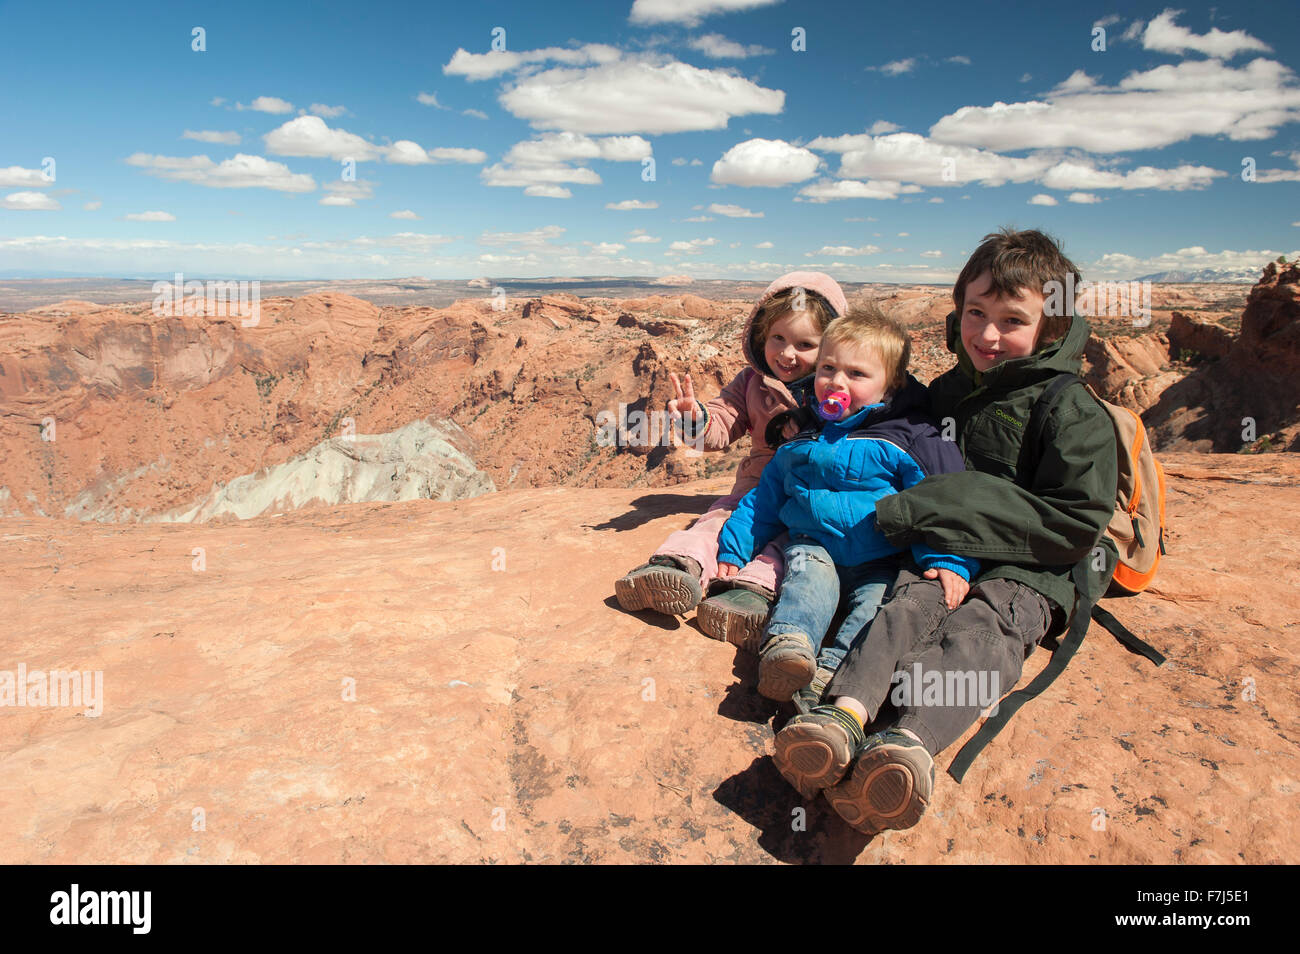 Children sitting at edge of canyon in Canyonlands National Park, Utah, USA Stock Photo